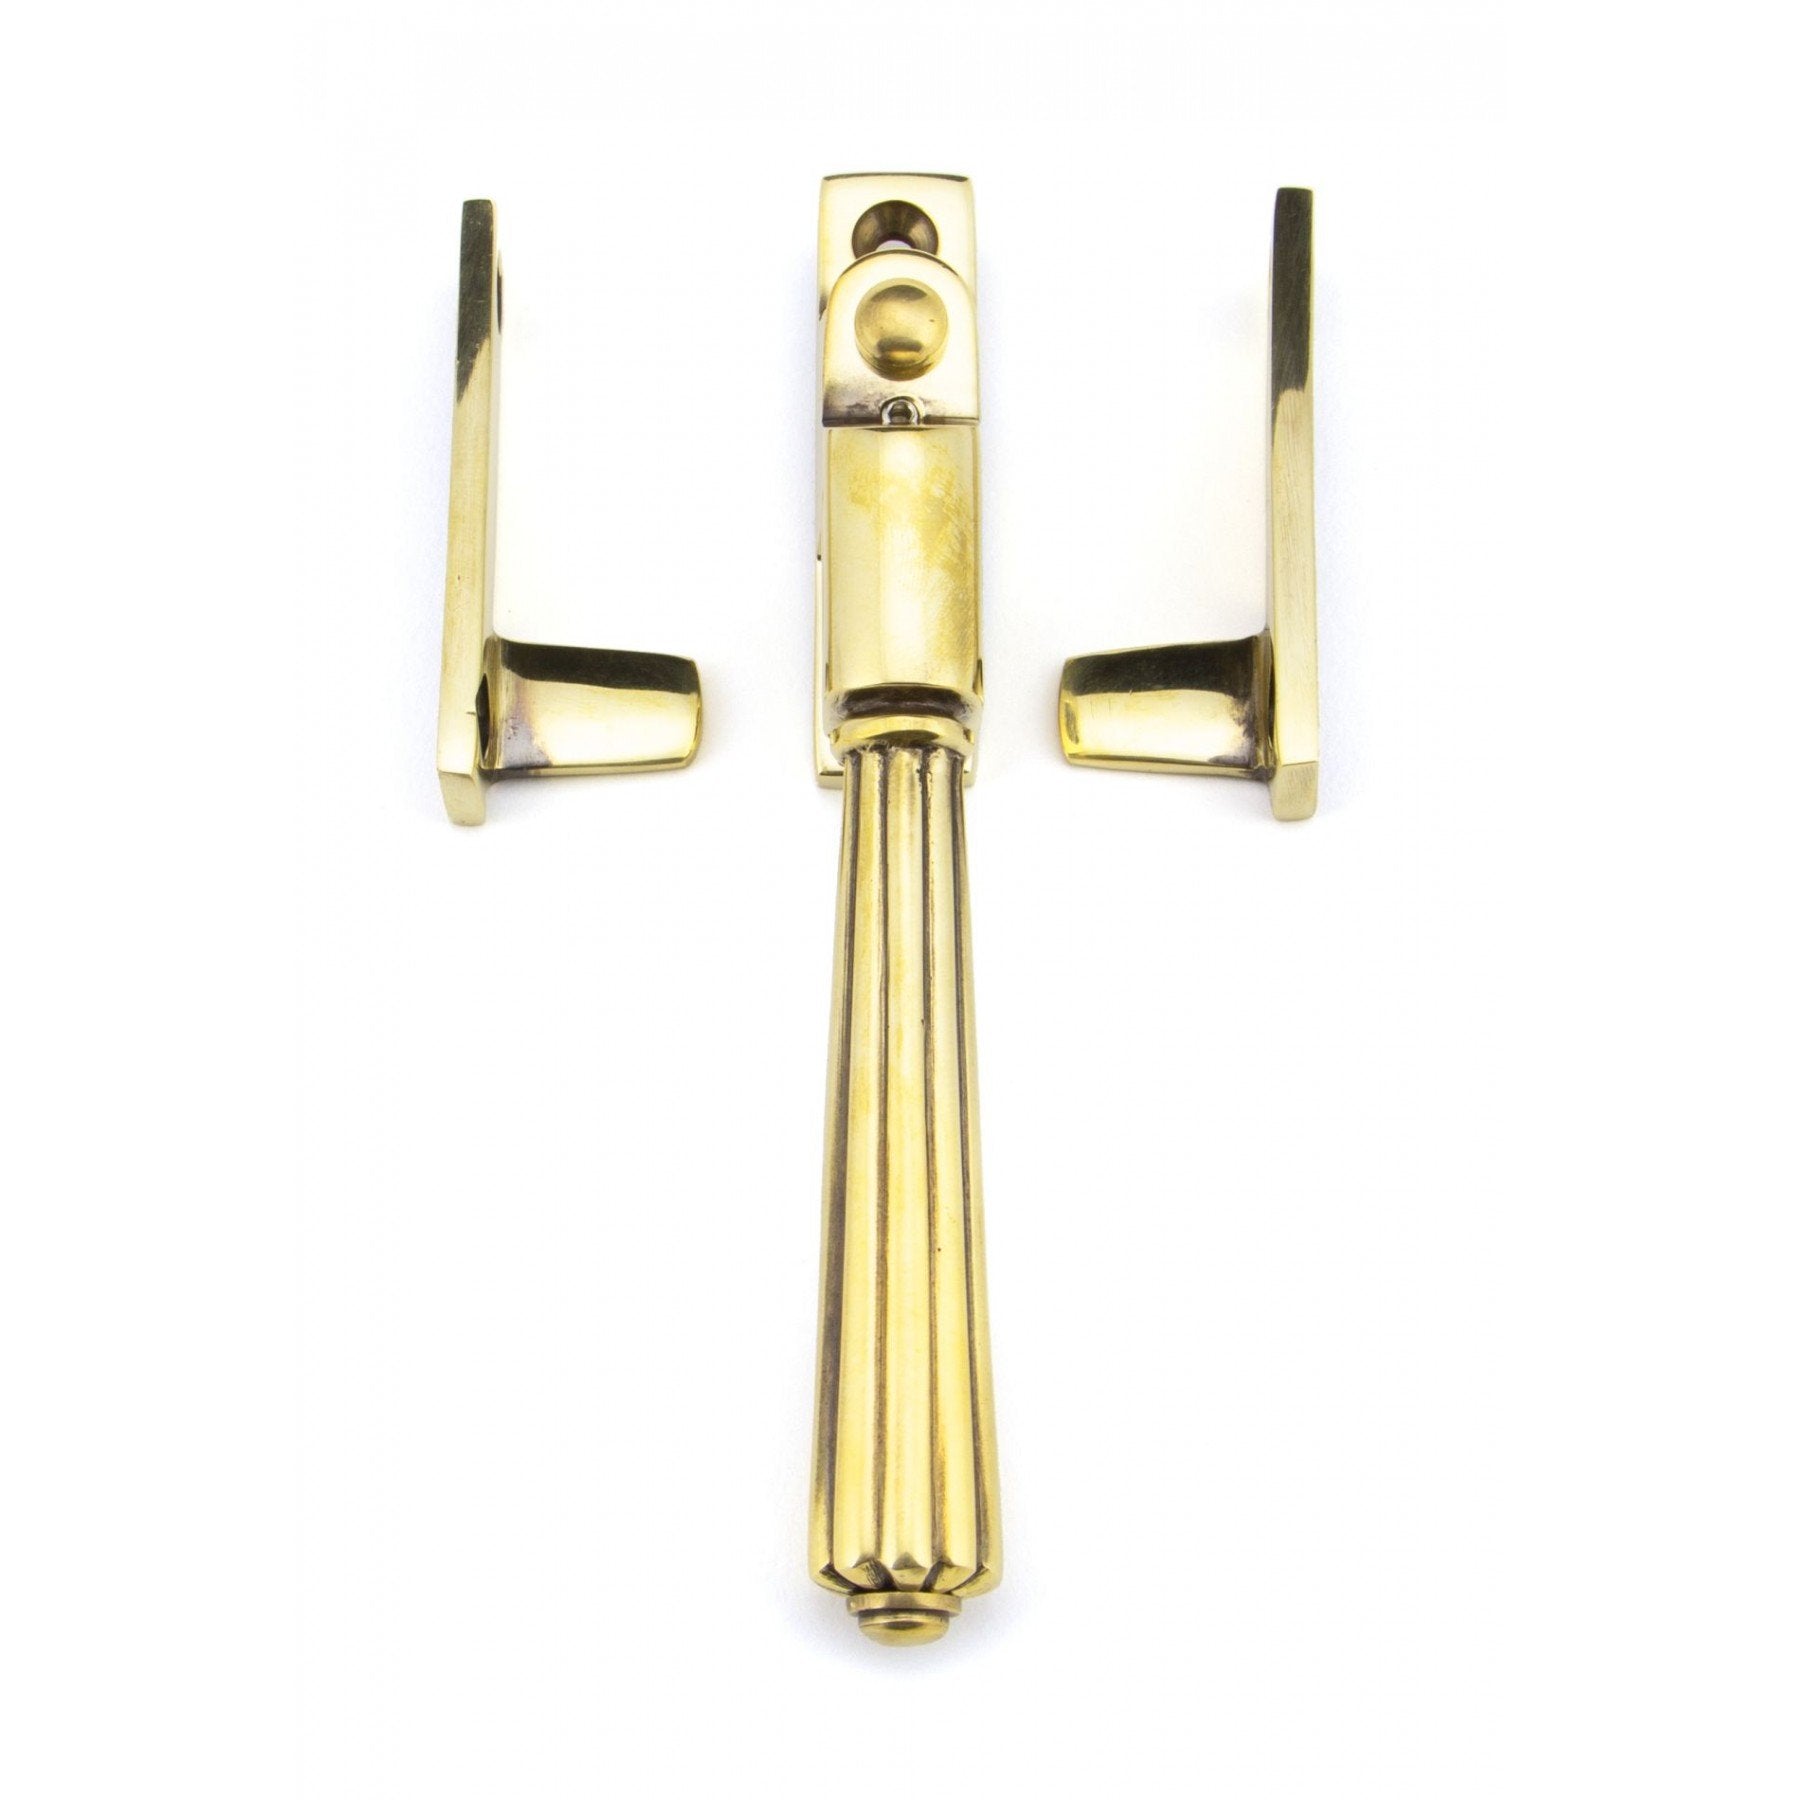 From the Anvil Aged Brass Night-Vent Locking Hinton Fastener